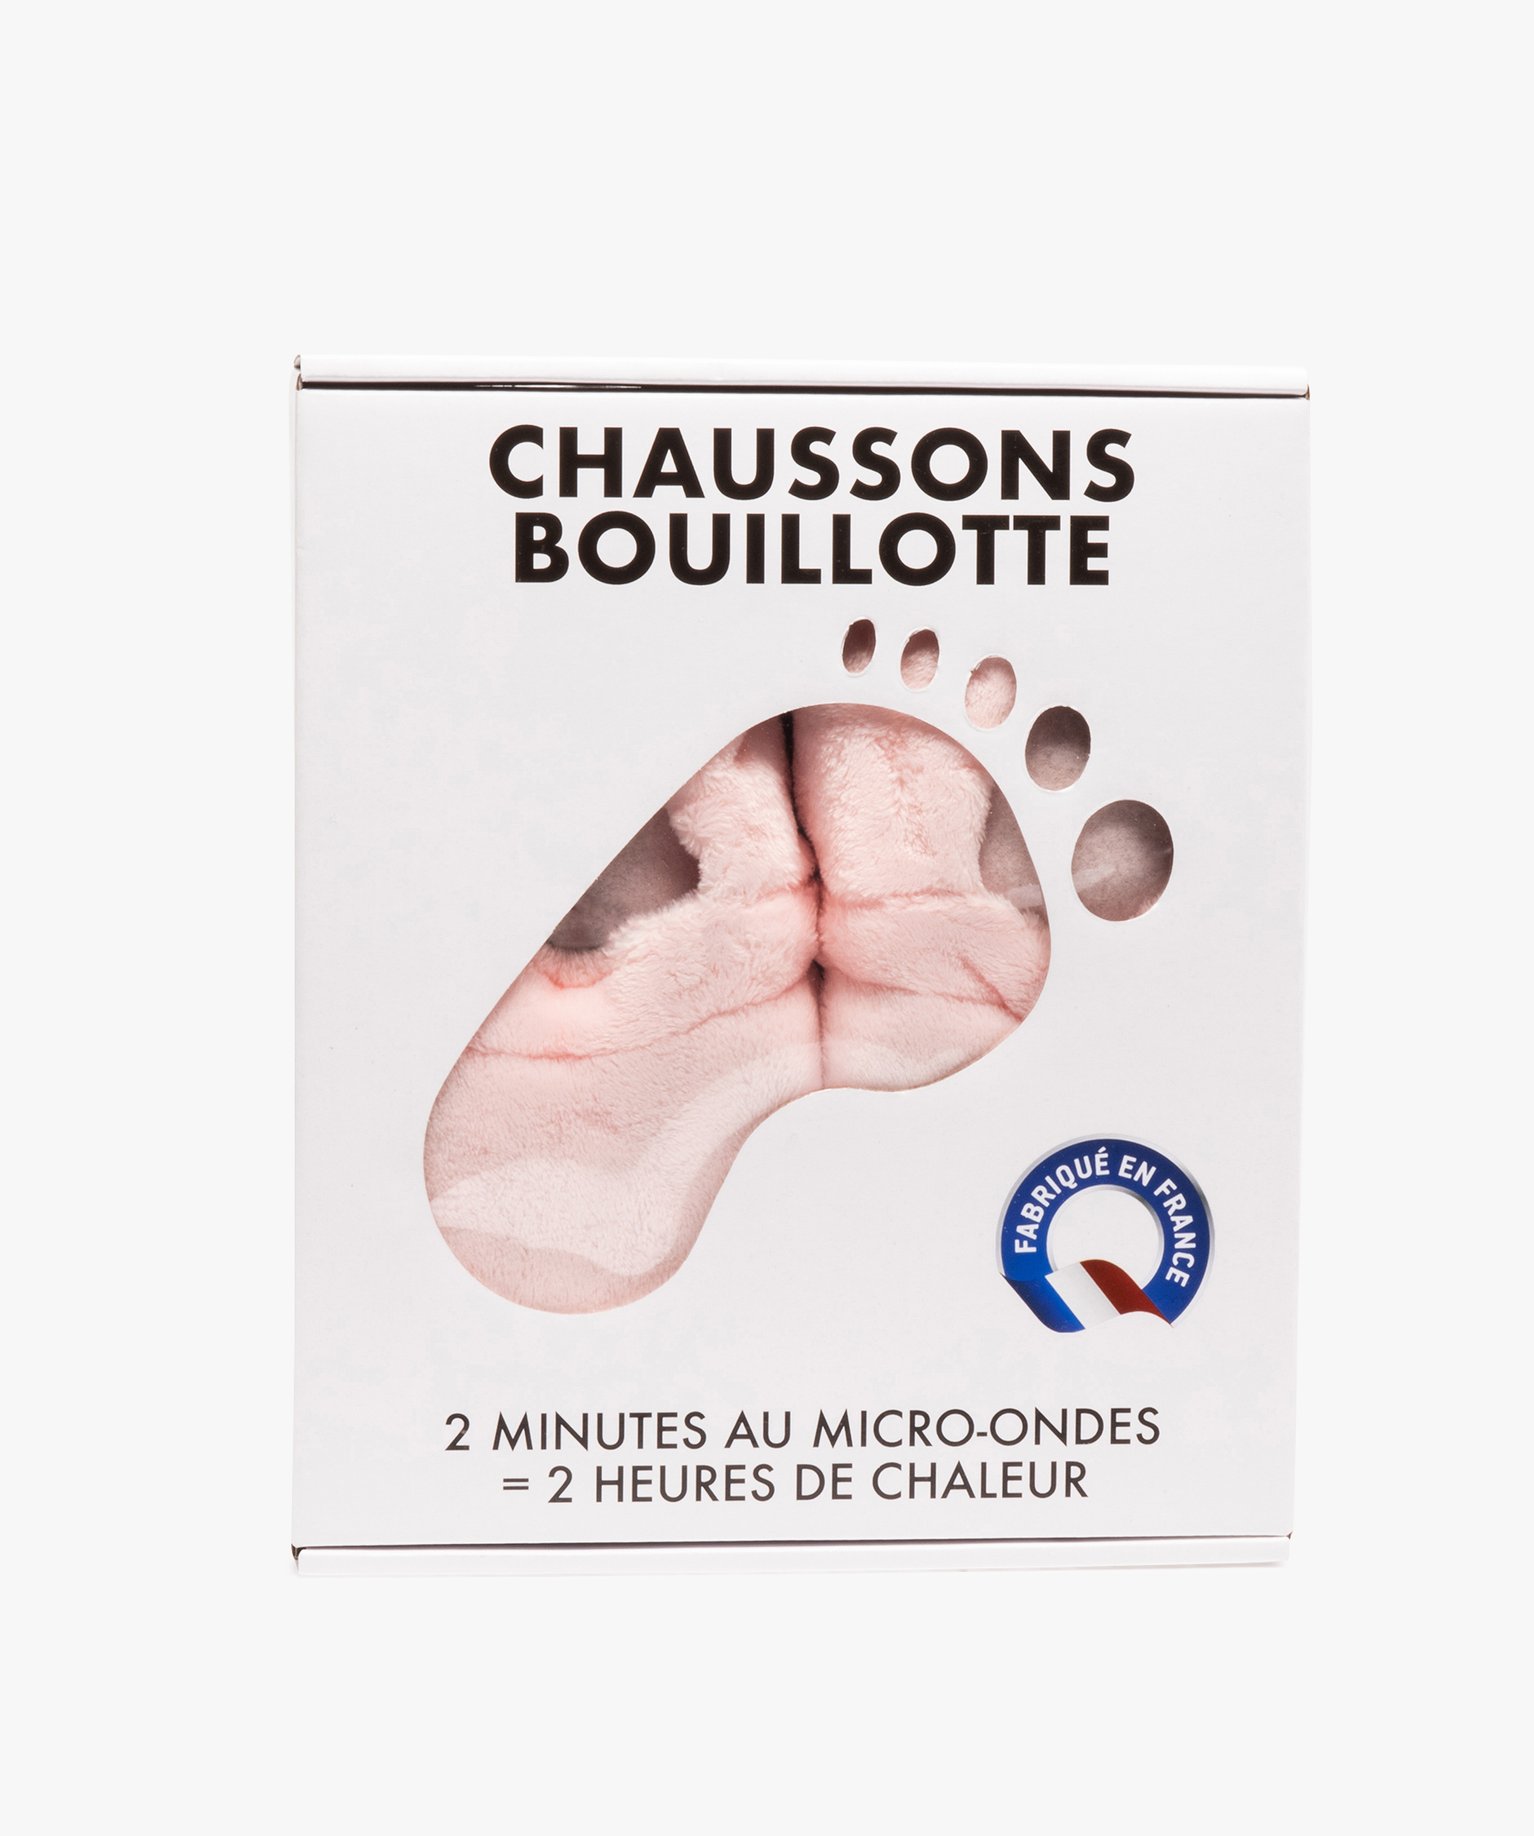 chaussons bouillotte a chauffer au micro-ondes rose